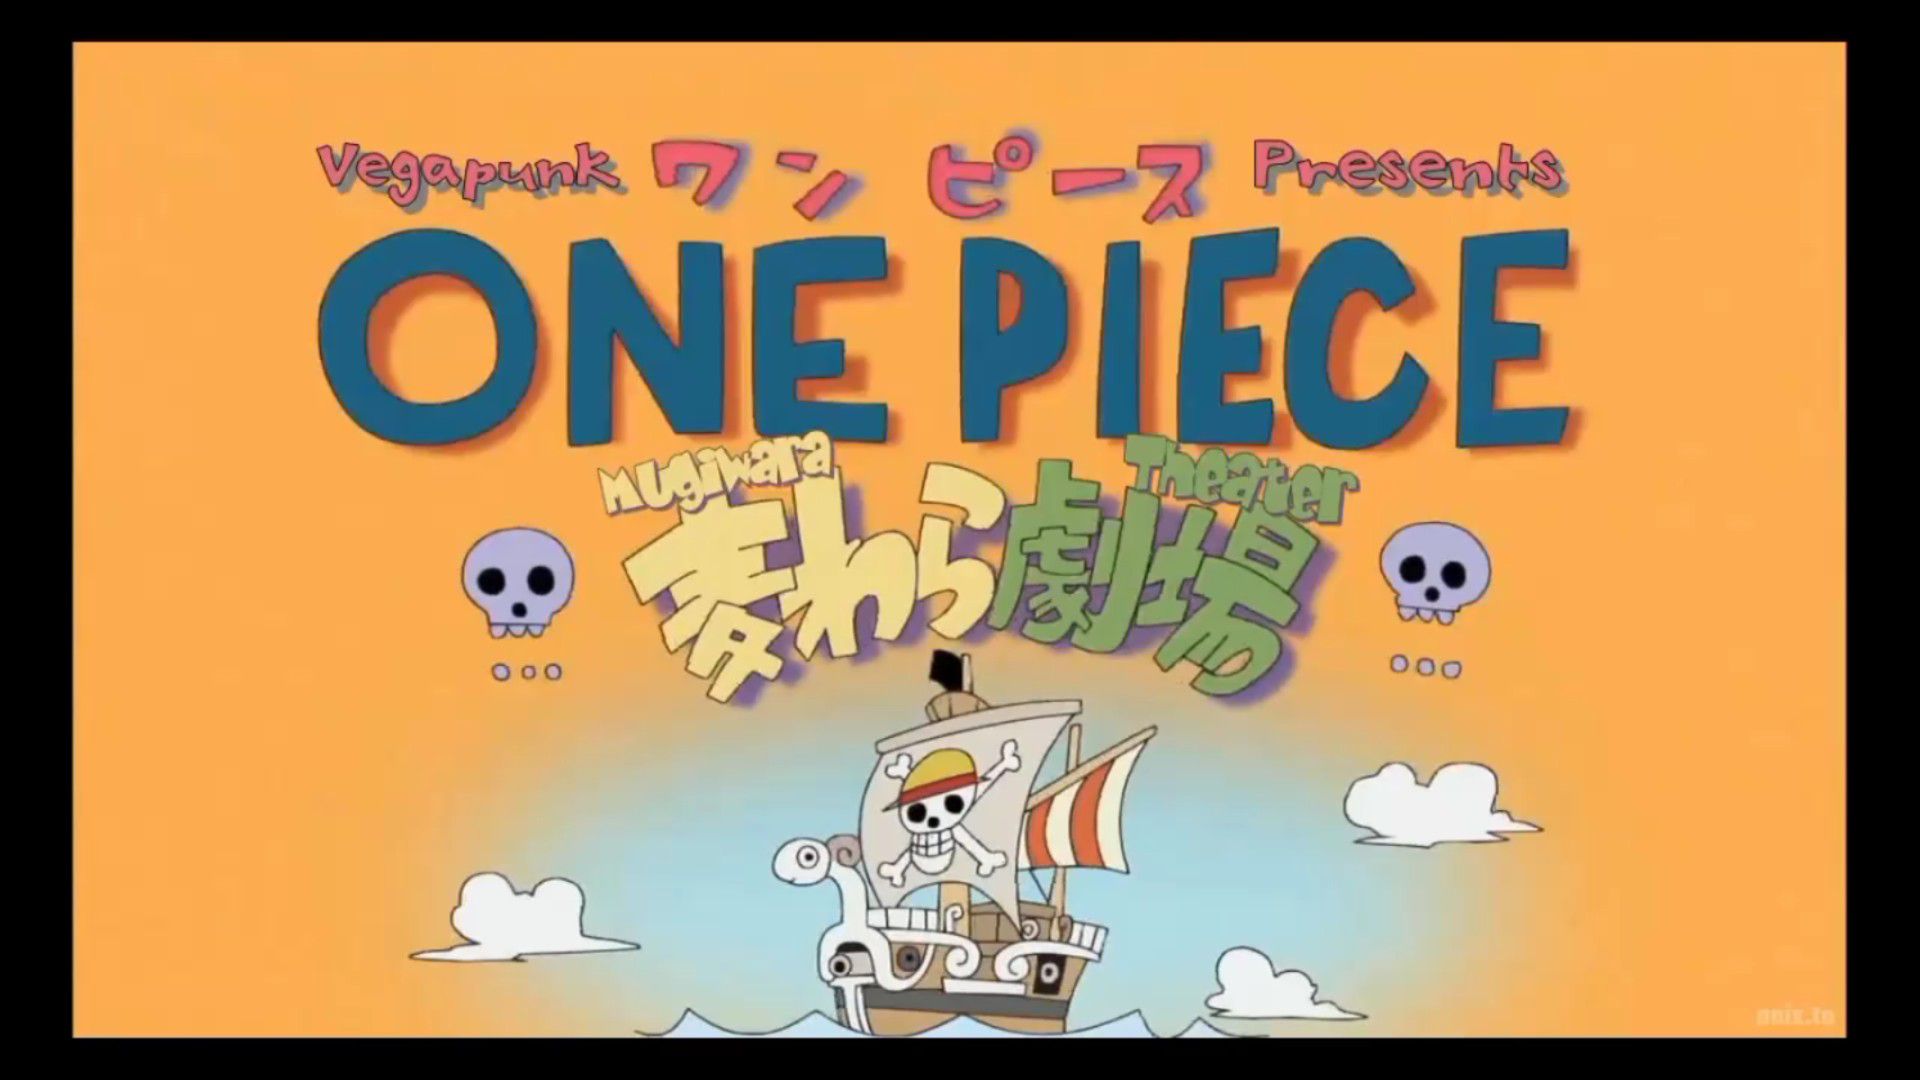 DVD One Piece Collection Series Eps 1 720 English Dubbed 